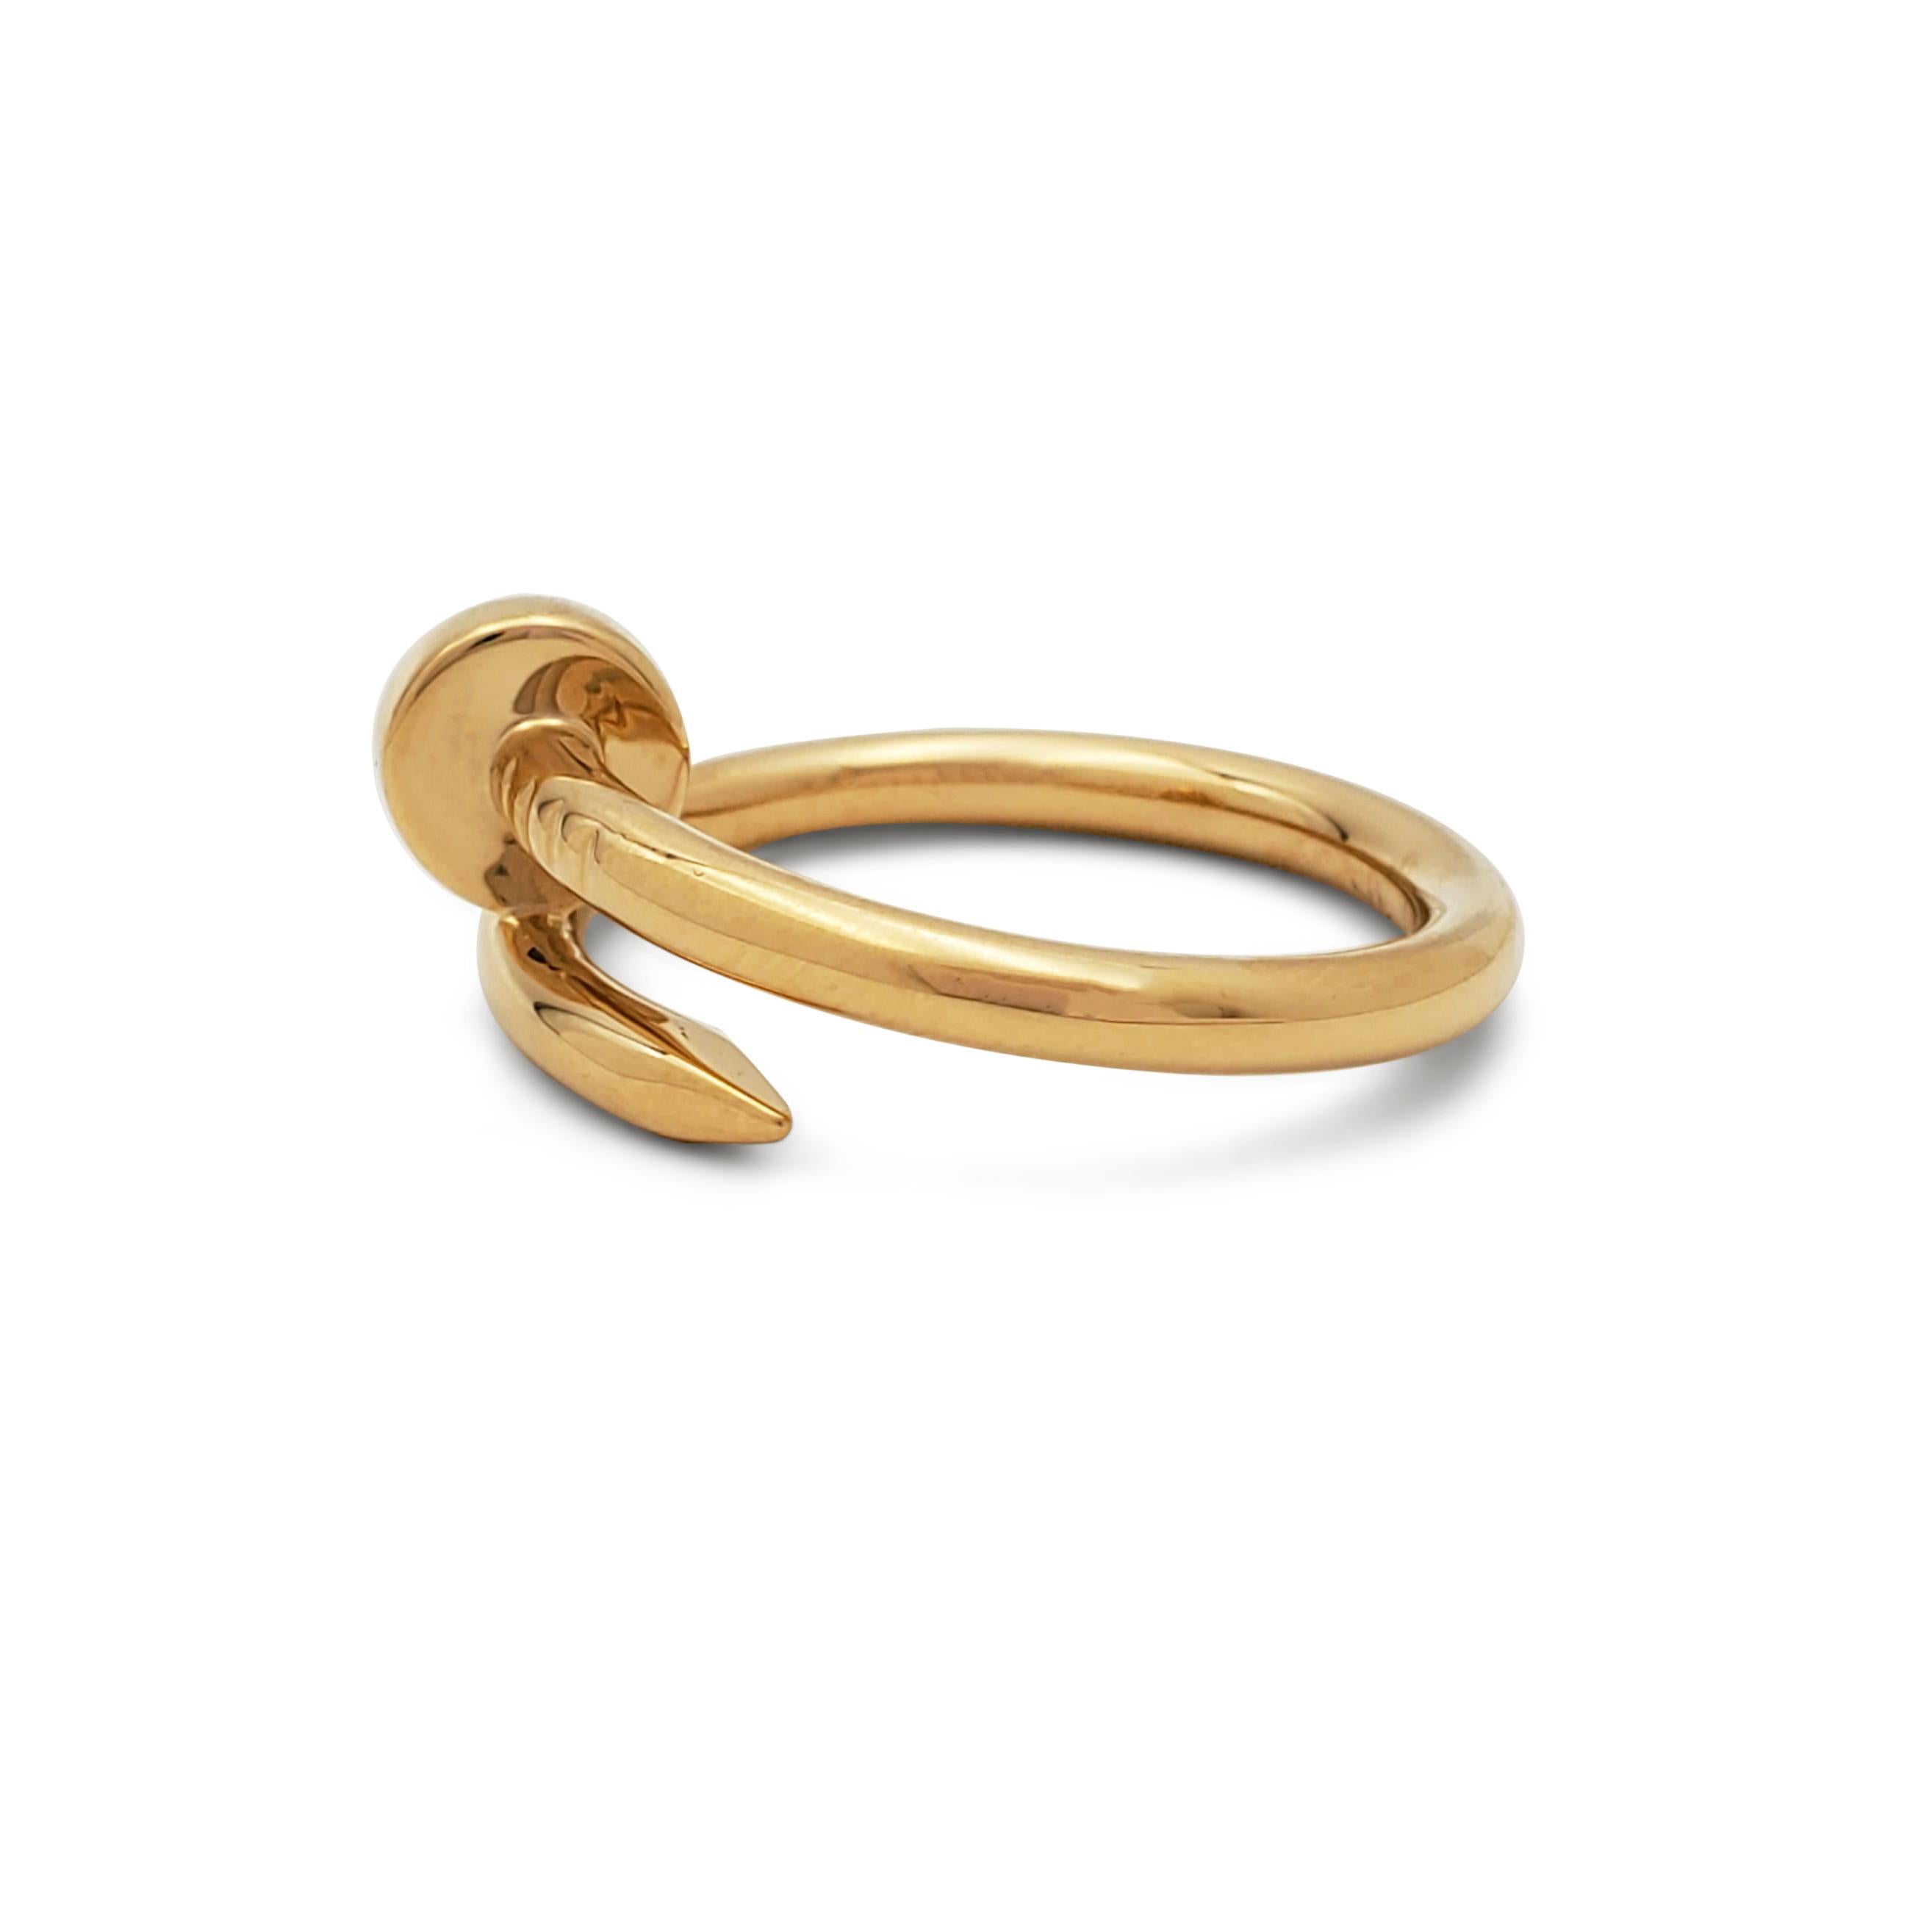 Designed as a 'just a nail', this authentic Cartier 'Juste un Clou' ring is modern, transcending the every day, yet bold. The nail ring is an innovative twist on a familiar and ordinary object. Size 62, 2.65mm wide. Signed Cartier, 62, Au750, with